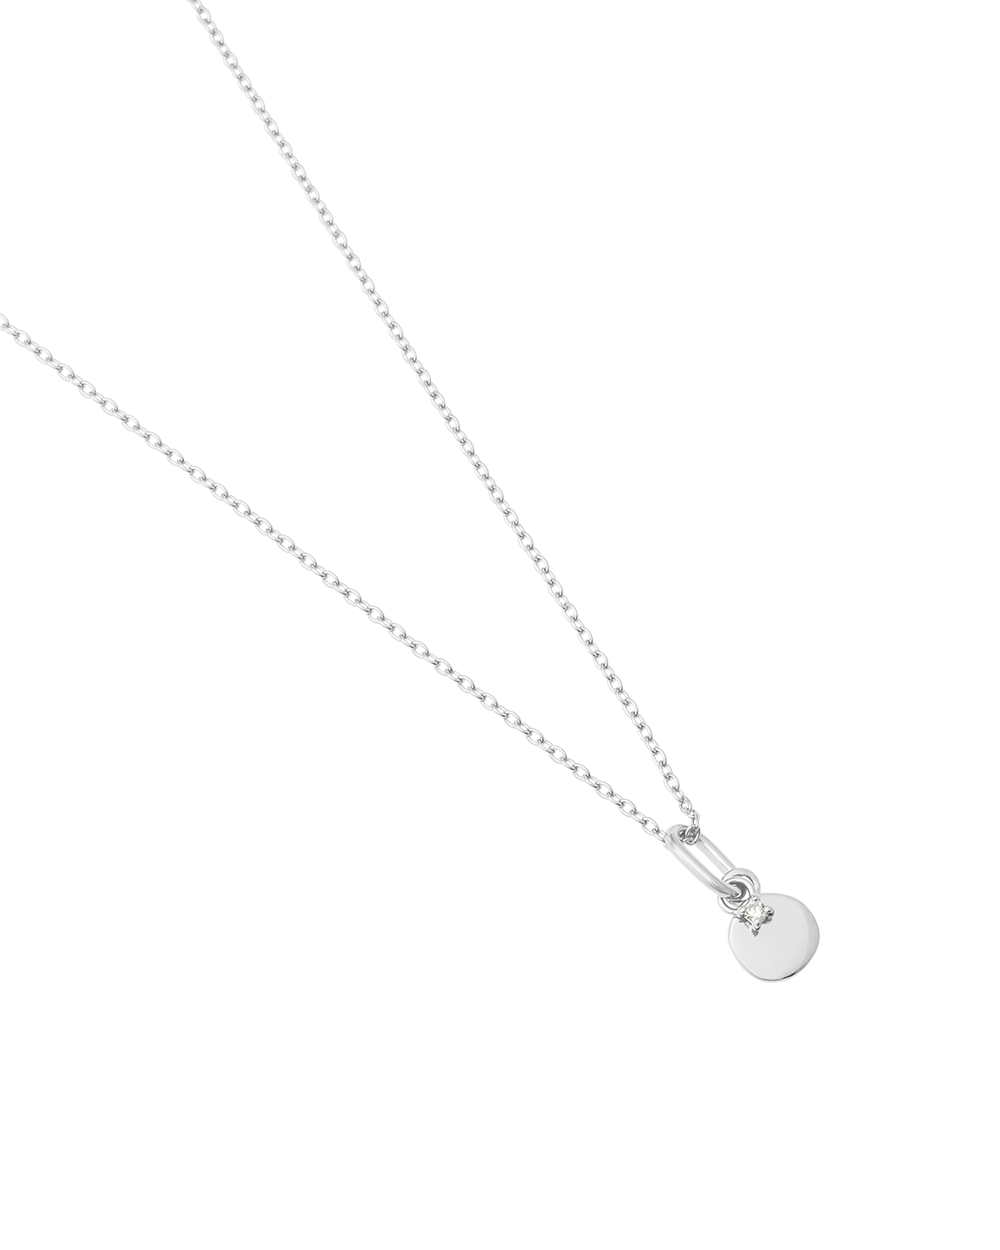 HONOUR NECKLACE (STERLING SILVER)